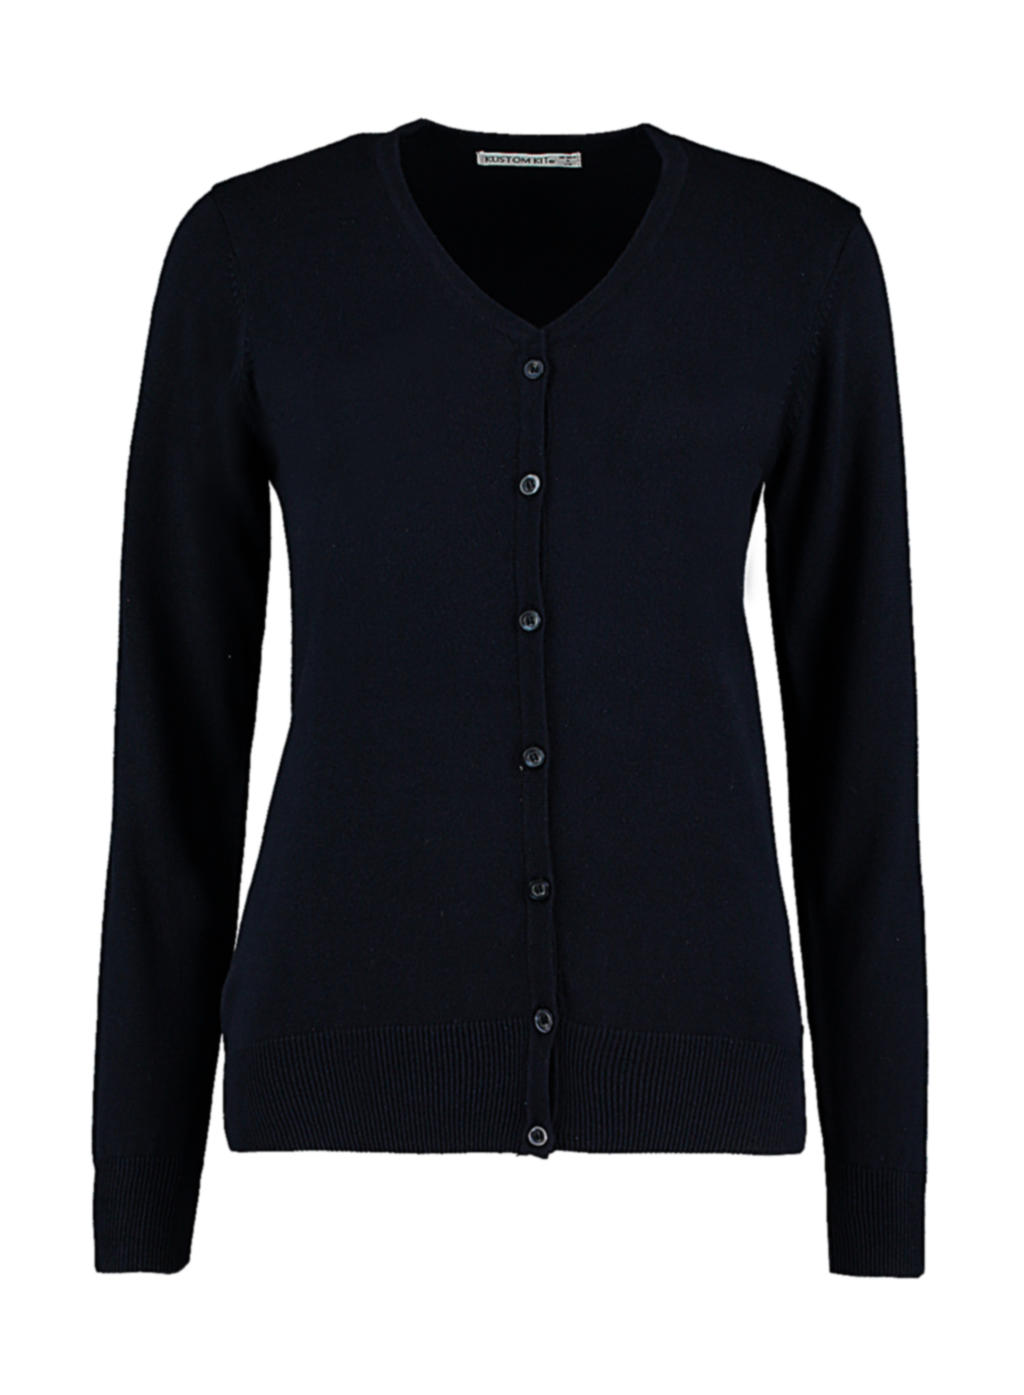  Womens Classic Fit Arundel V Neck Cardigan in Farbe Navy